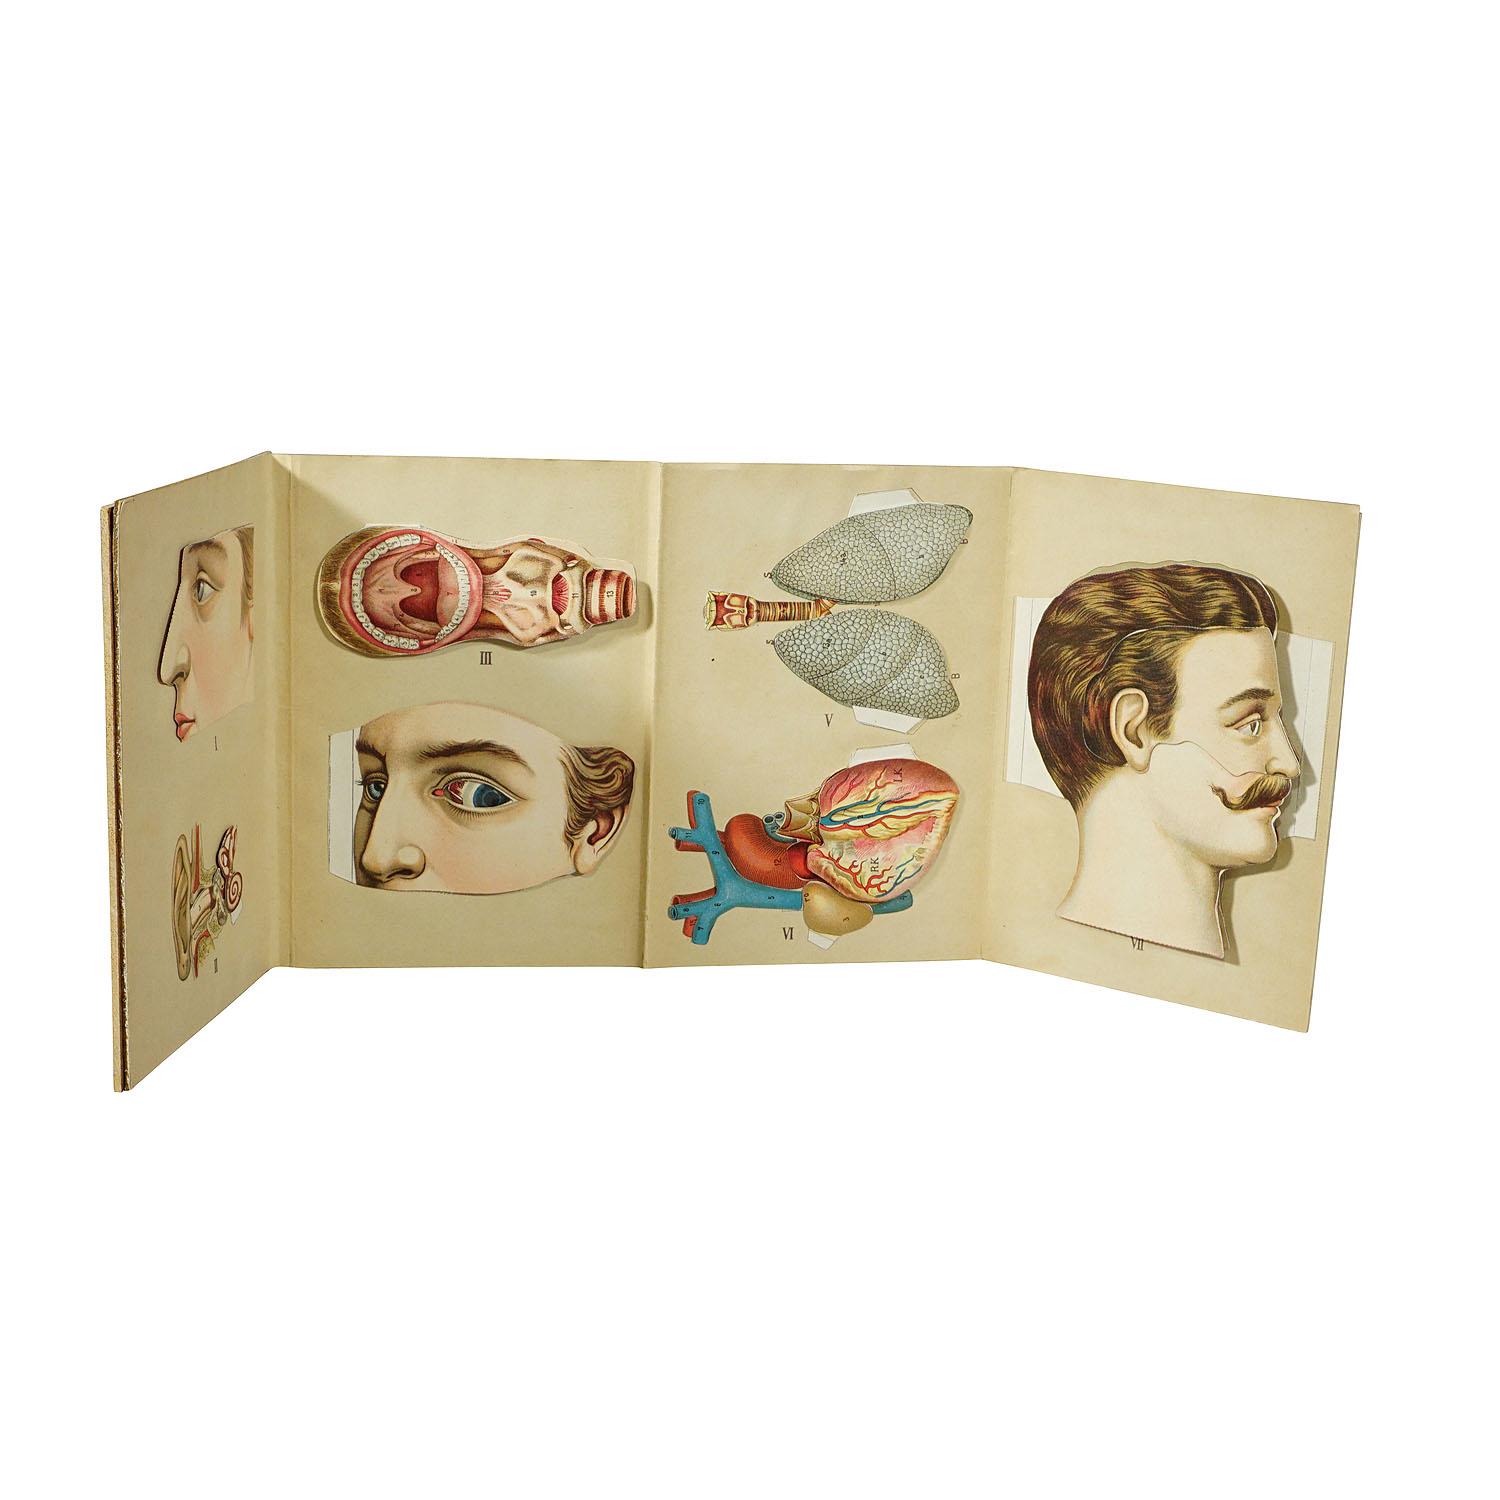 A rare 19ct anatomical brochure illustrating the human anatomy. Very detailed multicoloured depiction of human organs like lung, heart, head and eye. By folding of the multiple layers the inner structure of the organs is displayed very descriptive.